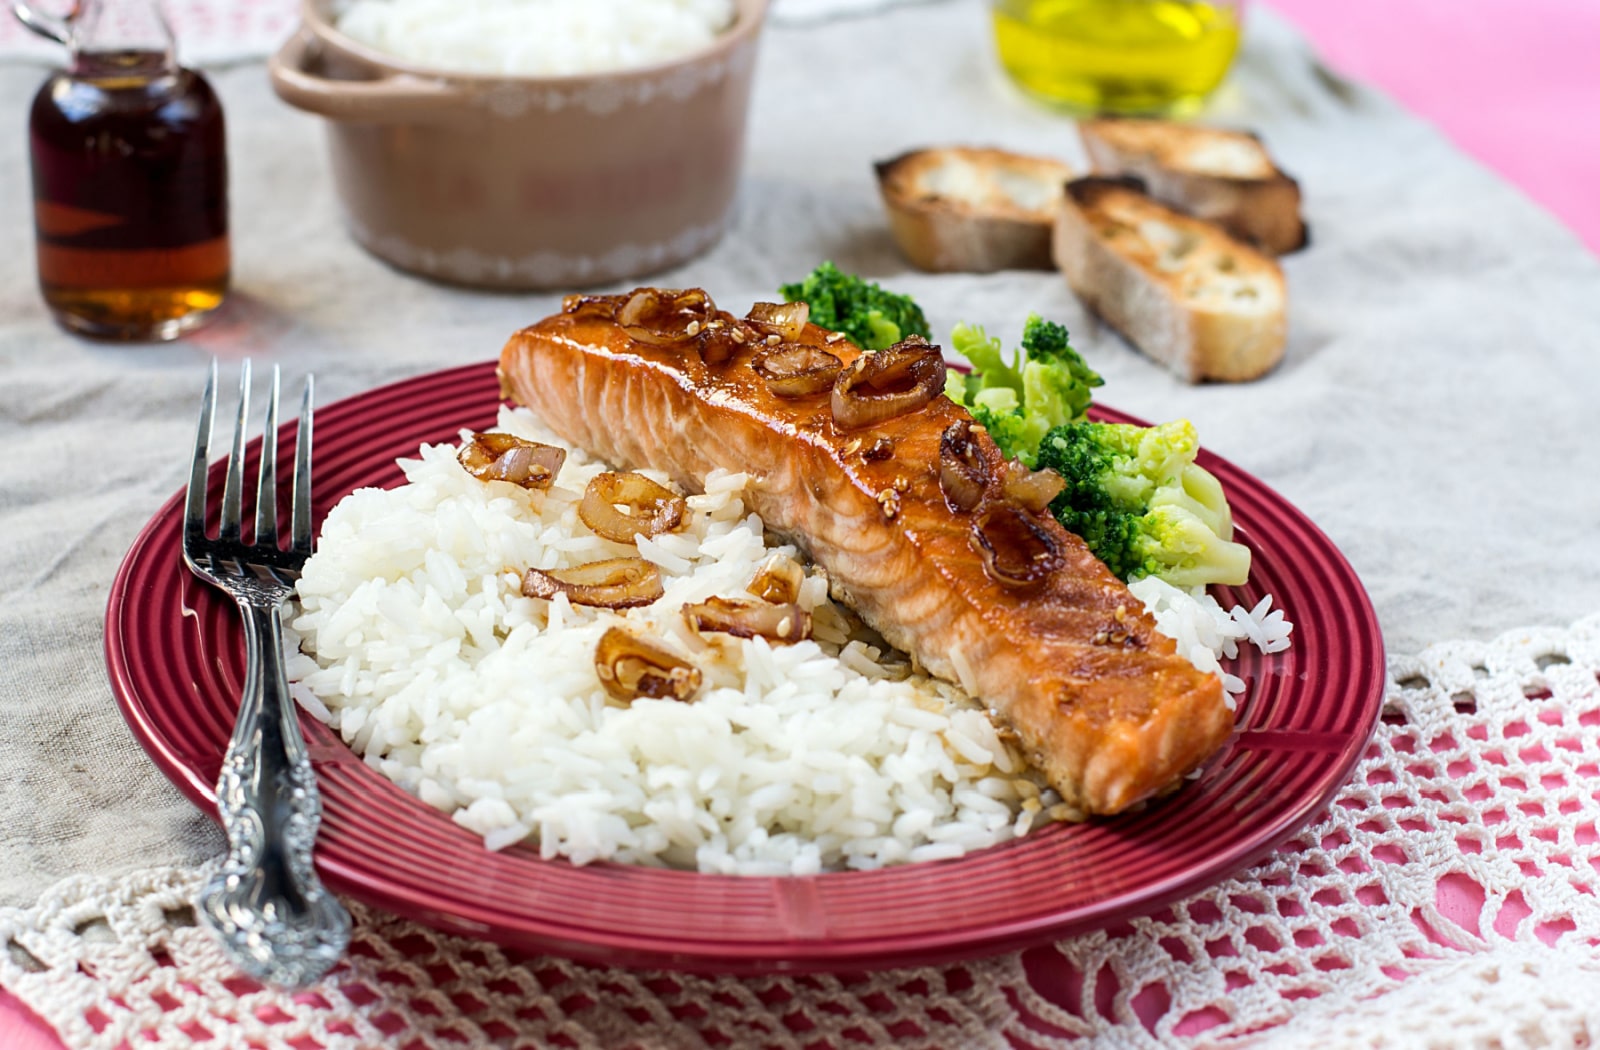 A plate of maple glazed salmon, sitting on a bed of white rice, next to some cooked broccoli. The salmon is also covered with caramelized onions.